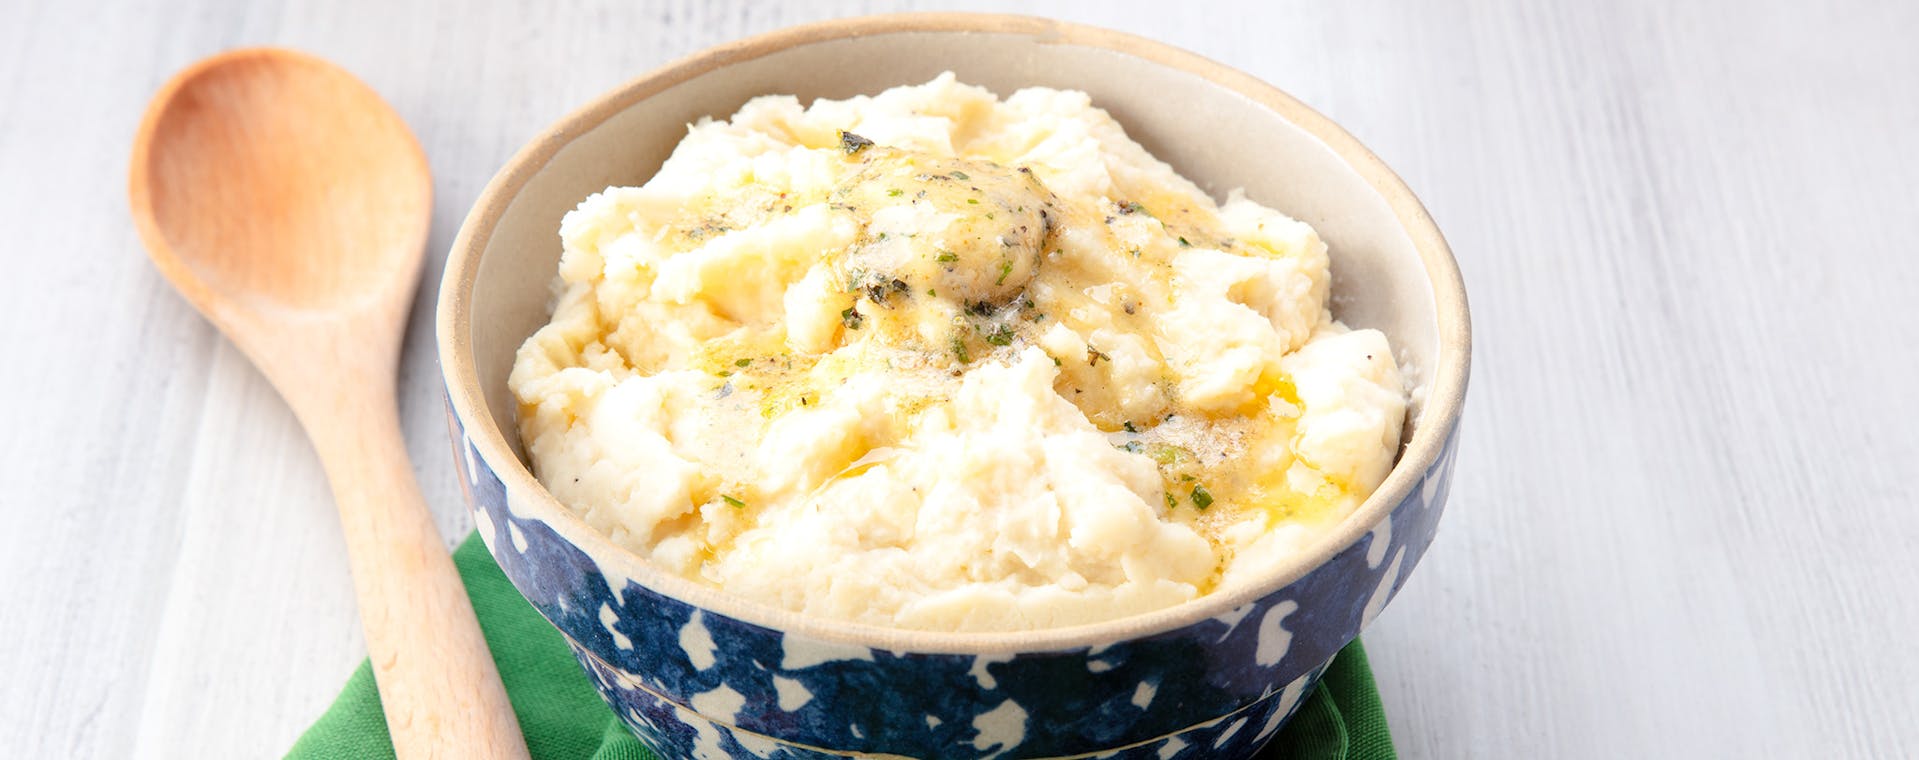 Mashed Potatoes with Roasted Garlic Herb flavored butter